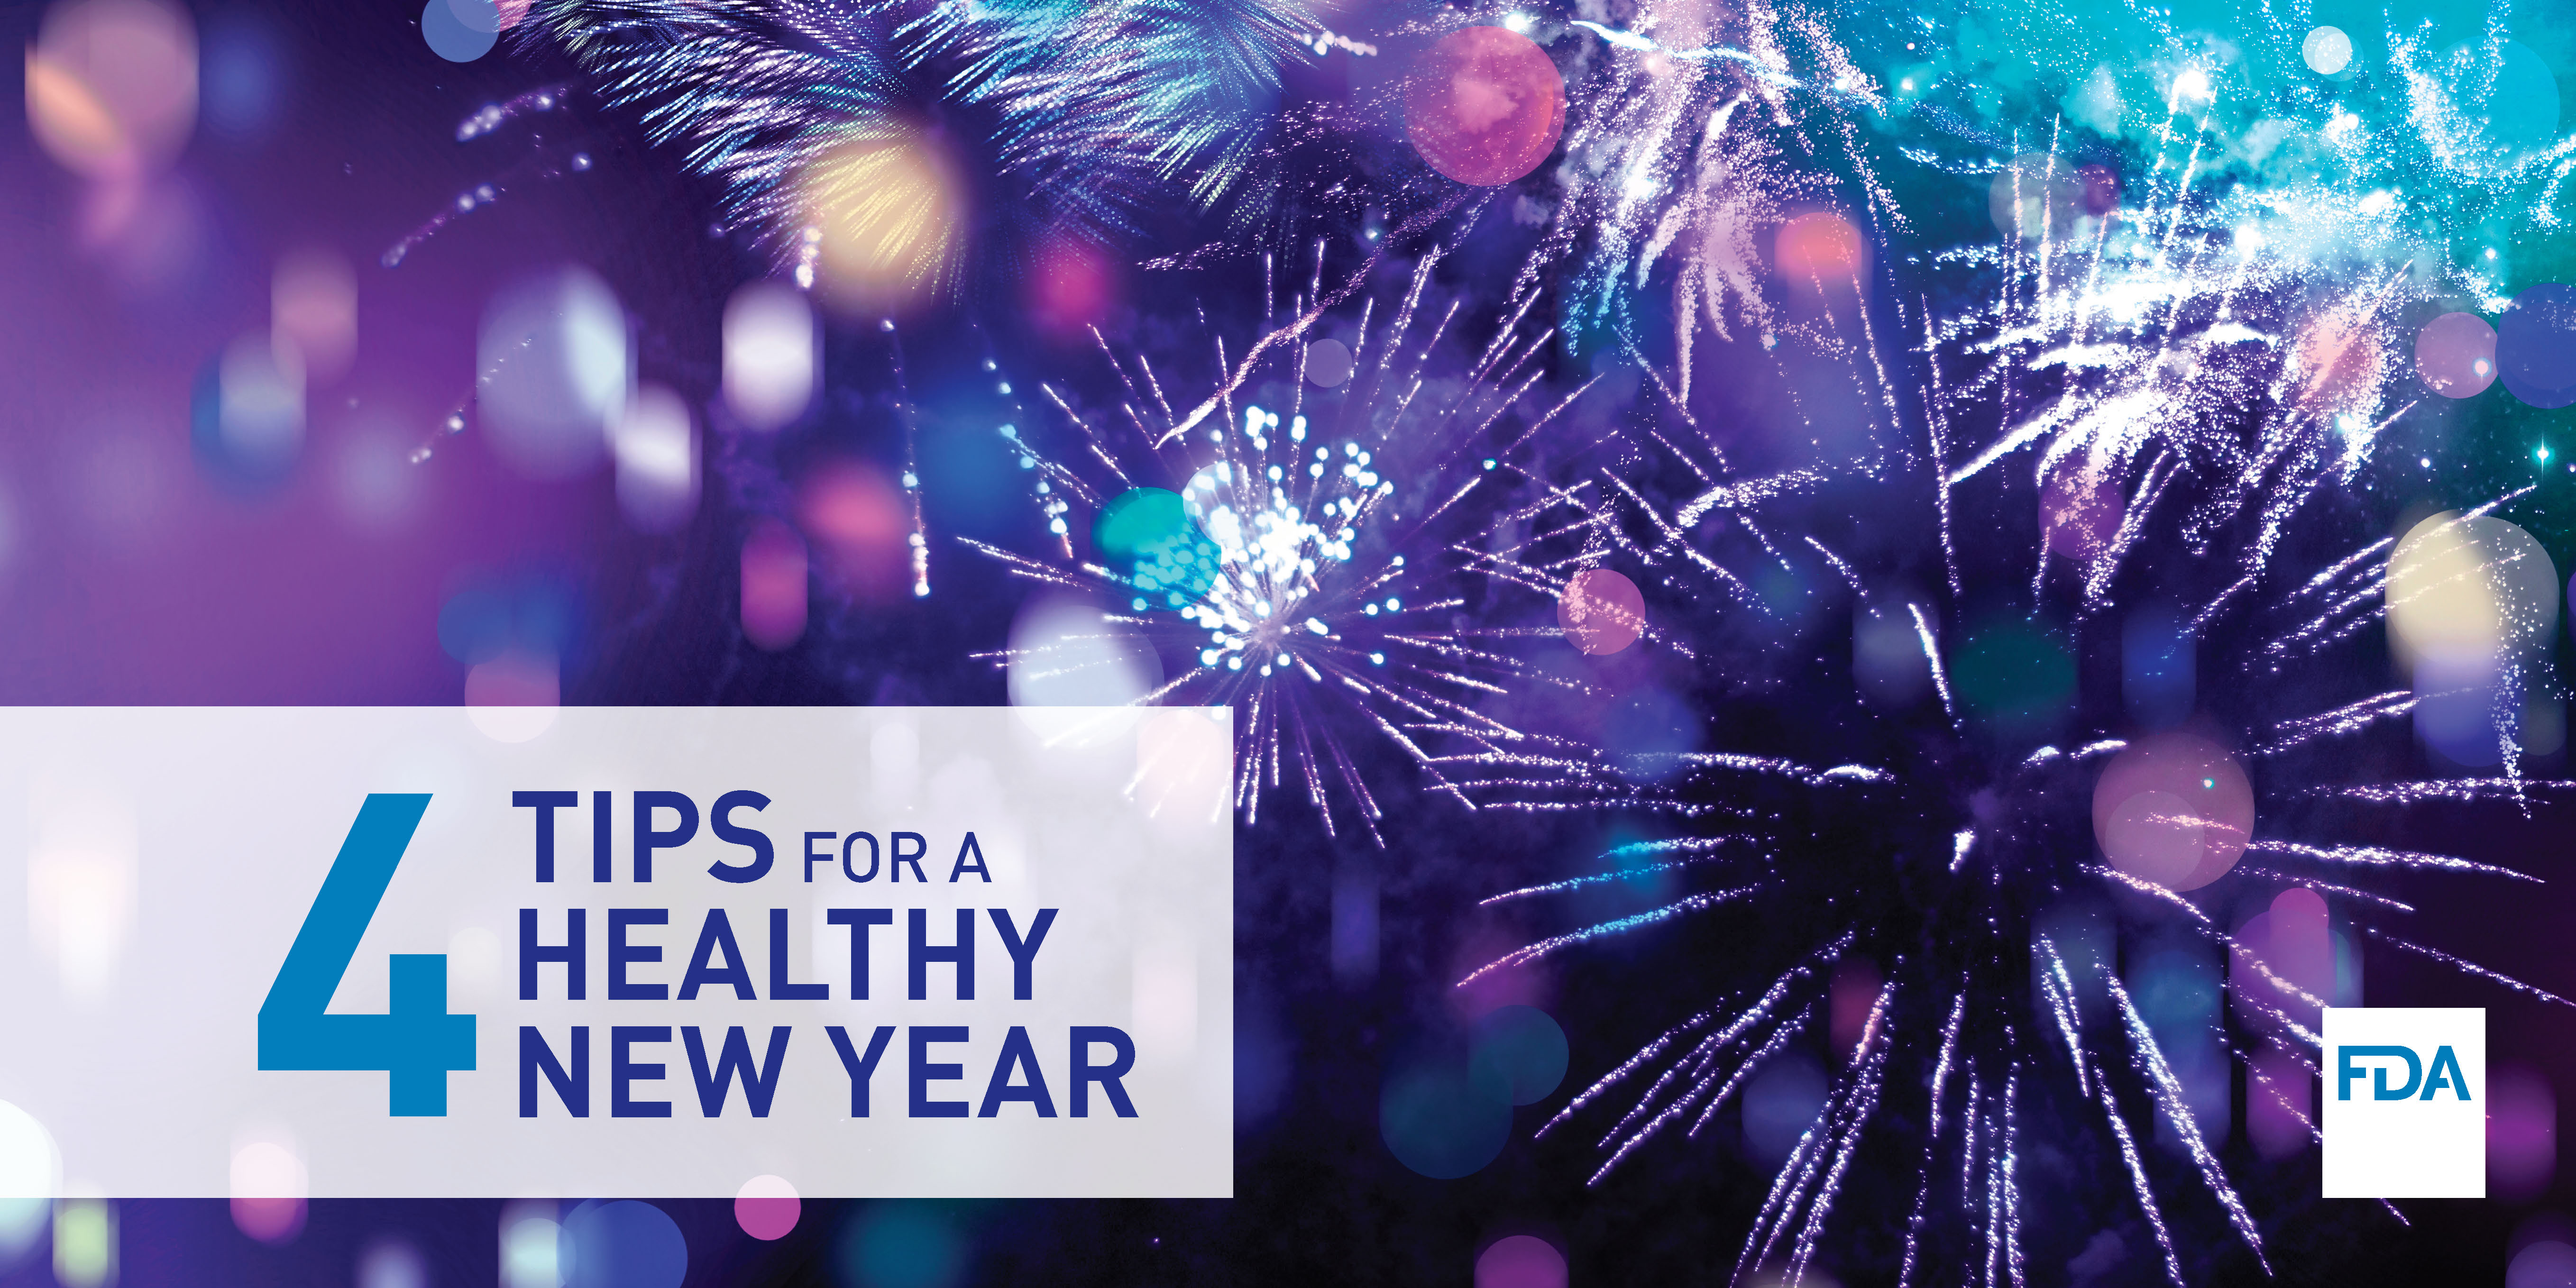 4 Tips for a Healthy New Year